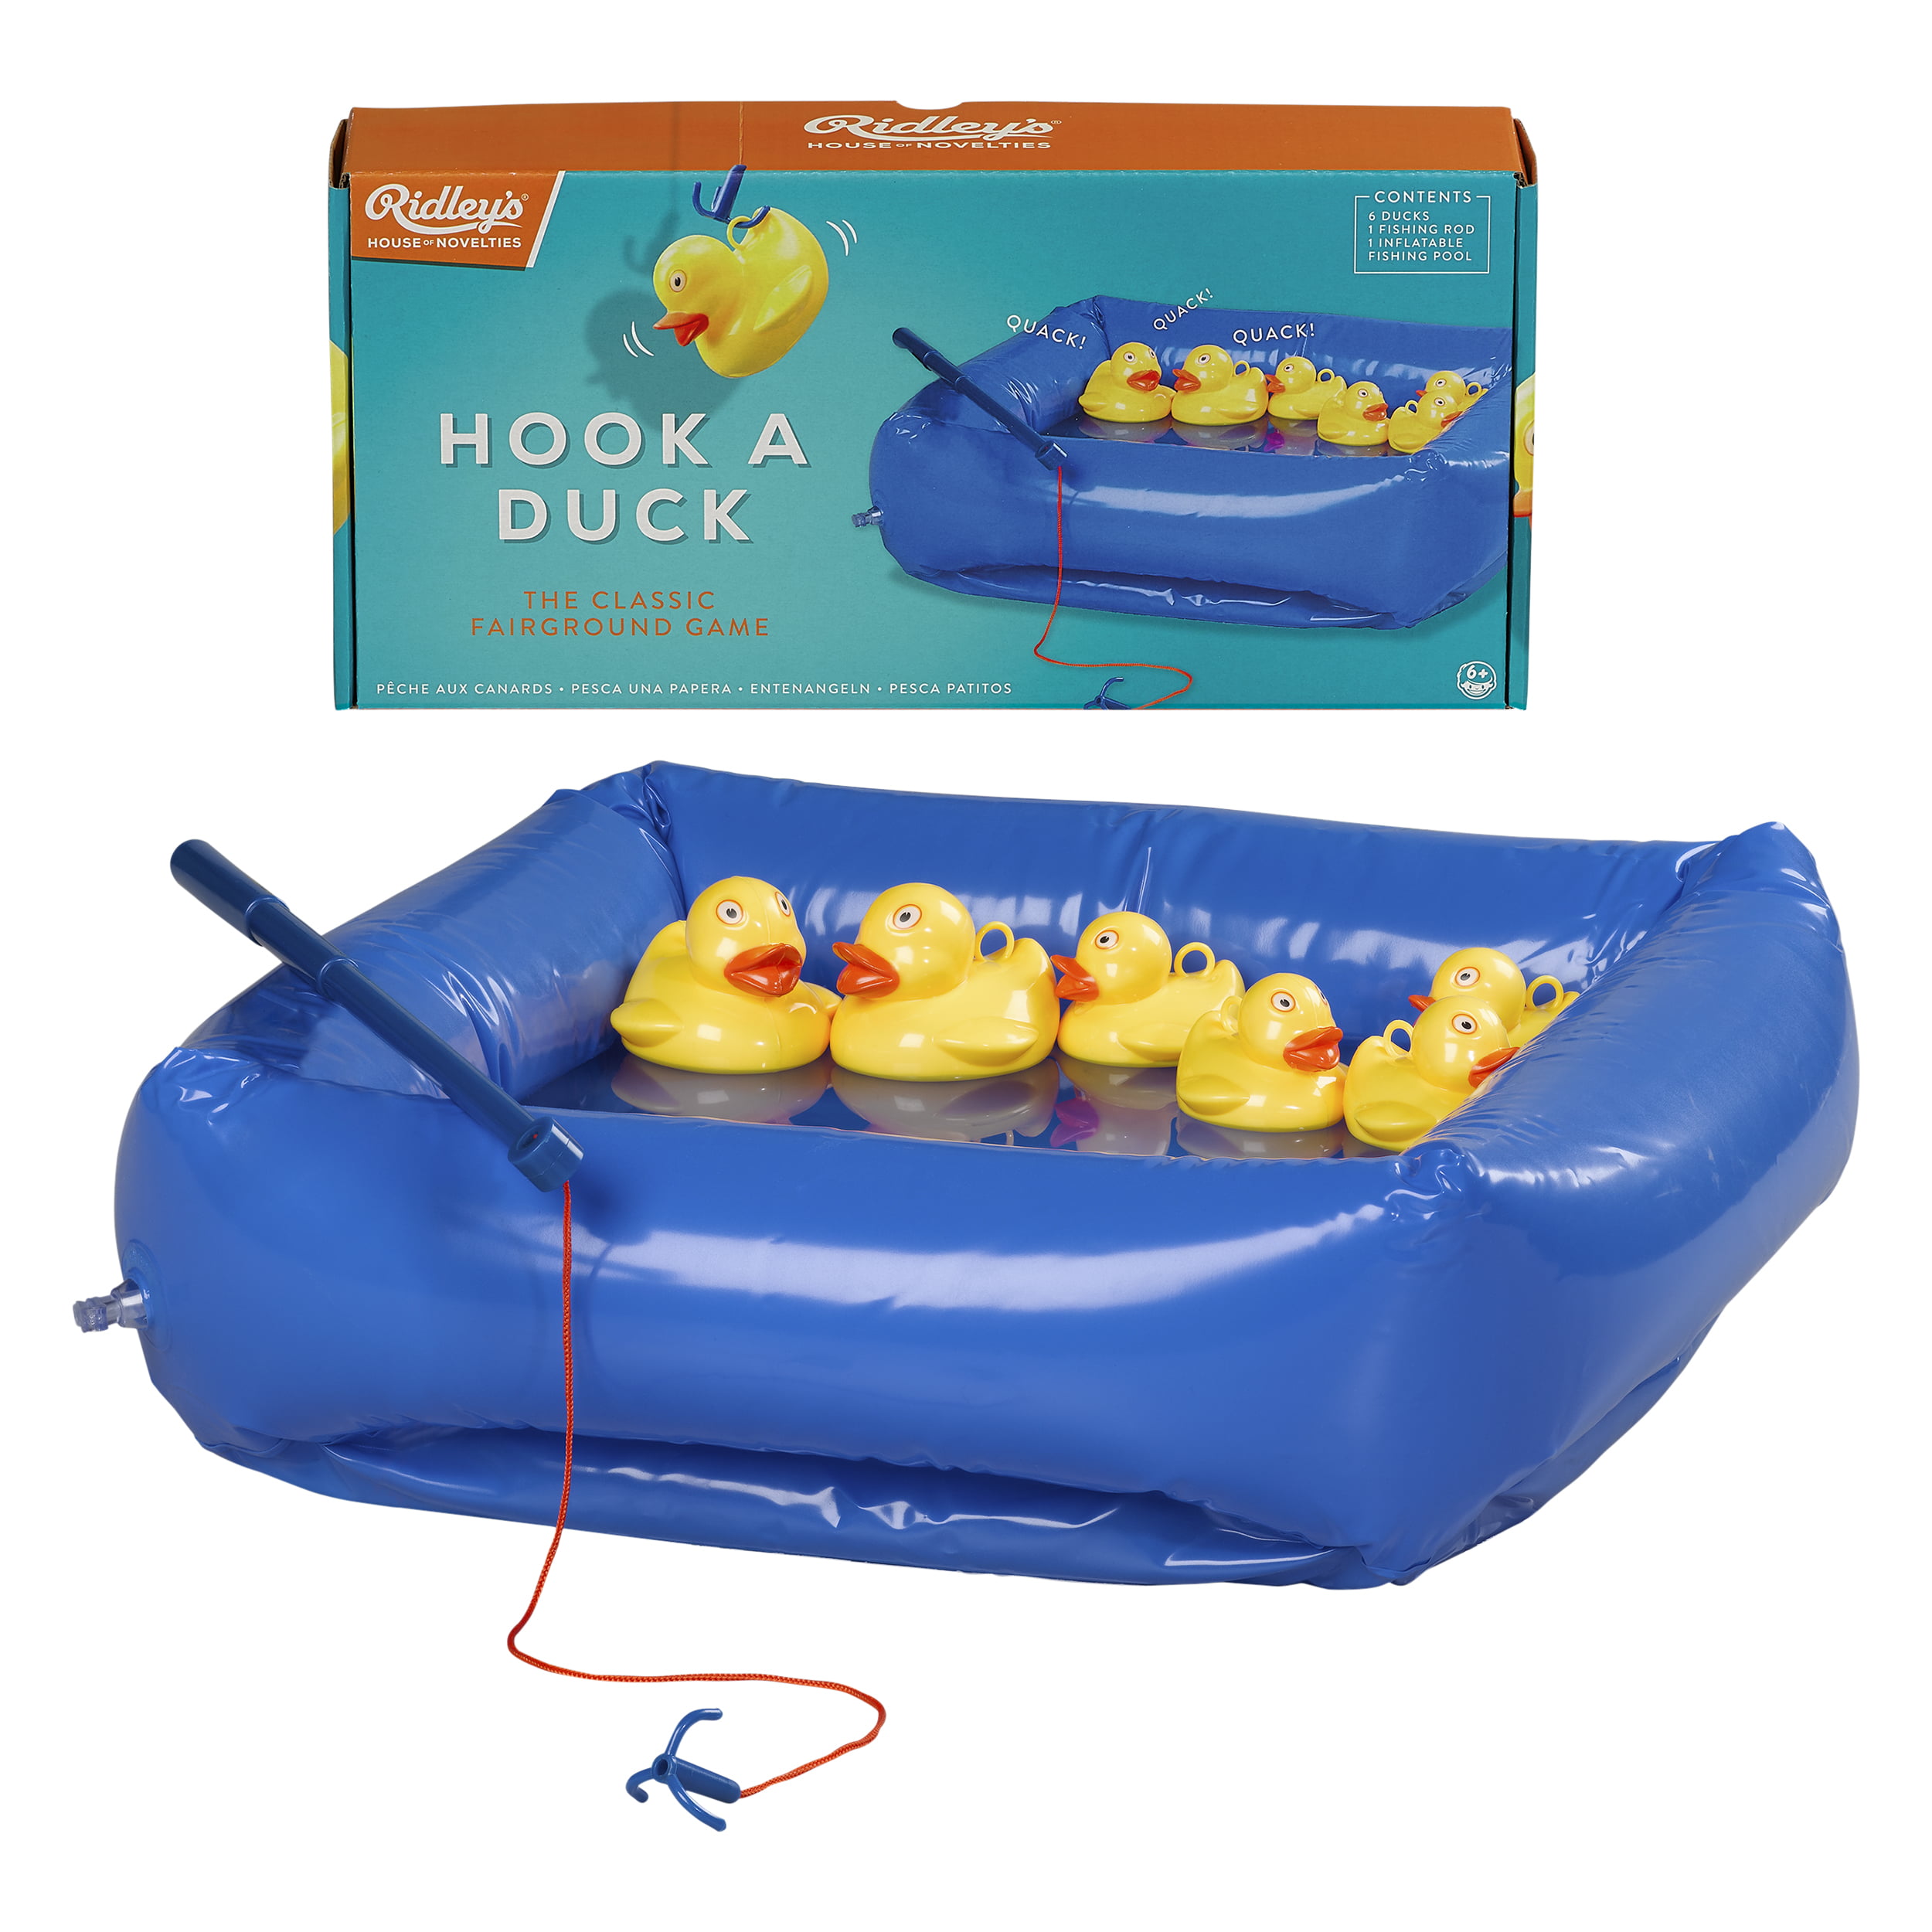 Ridley's House of Novelties Hook A Duck Carnival Game 